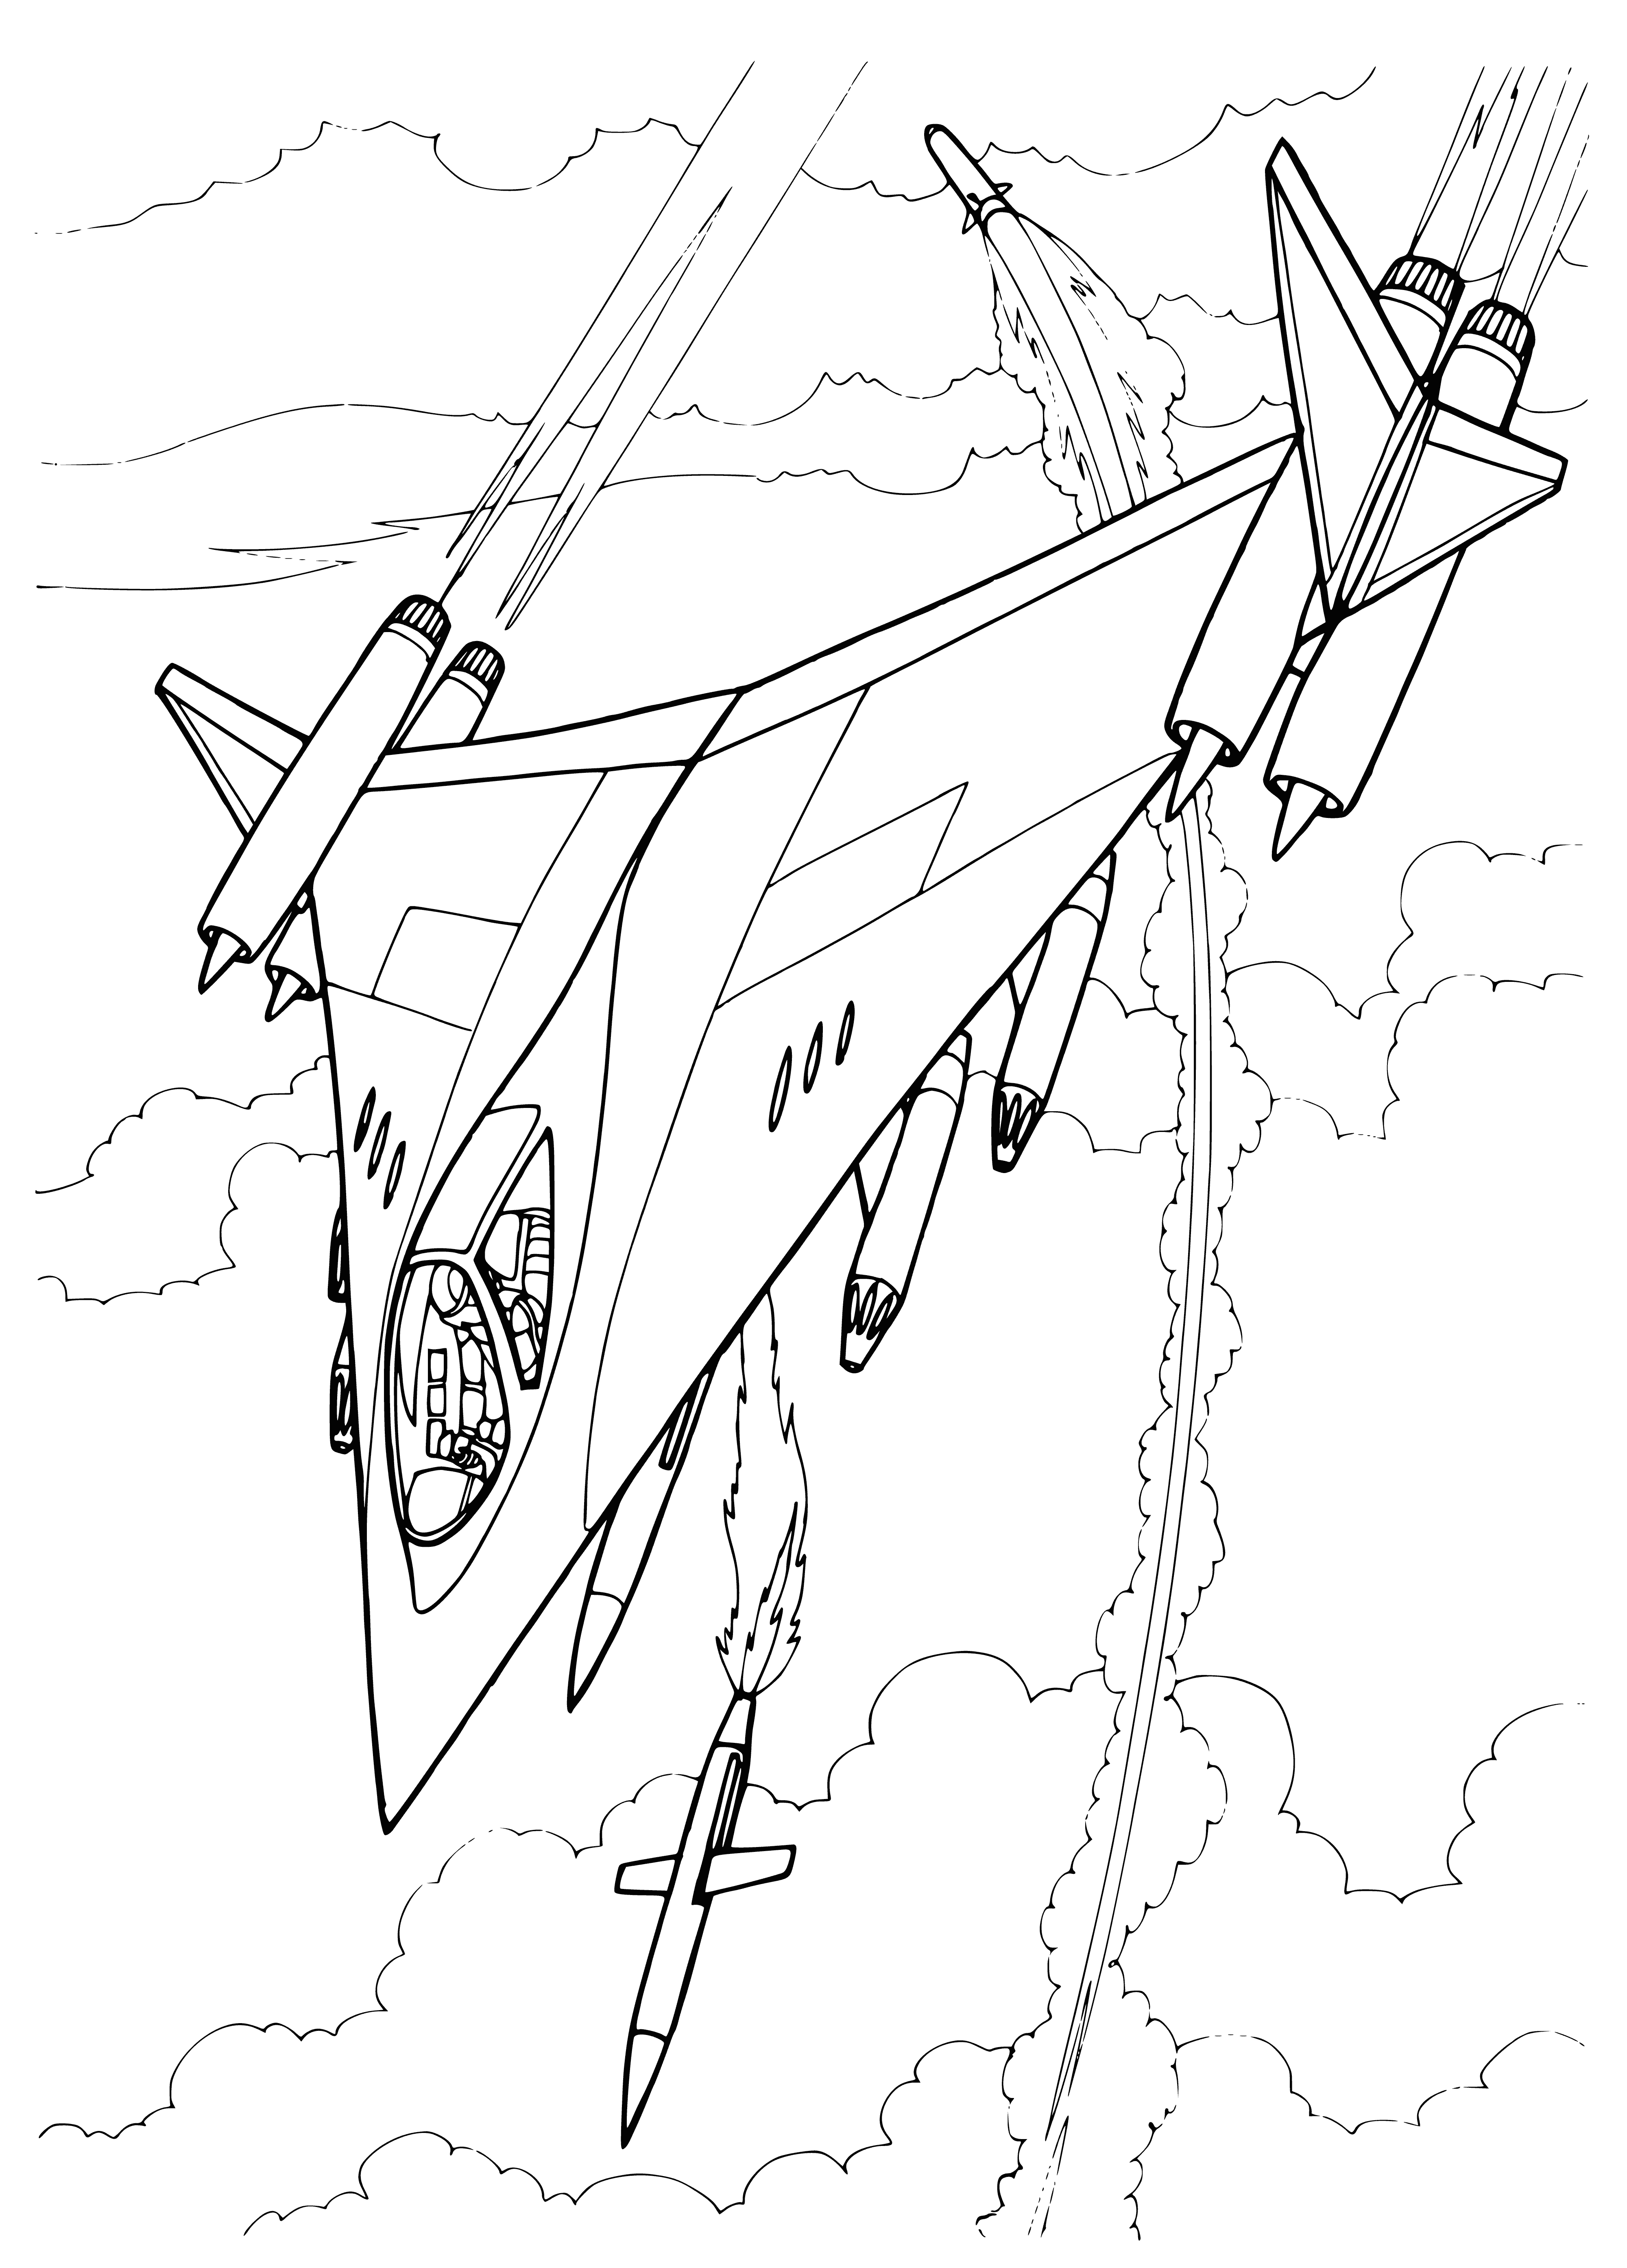 coloring page: The sky is deep blue & almost black. The sun is orange, featuring a small white dot. In the distance four stealth planes fly in formation; they're nearly invisible and headed straight for the sun.